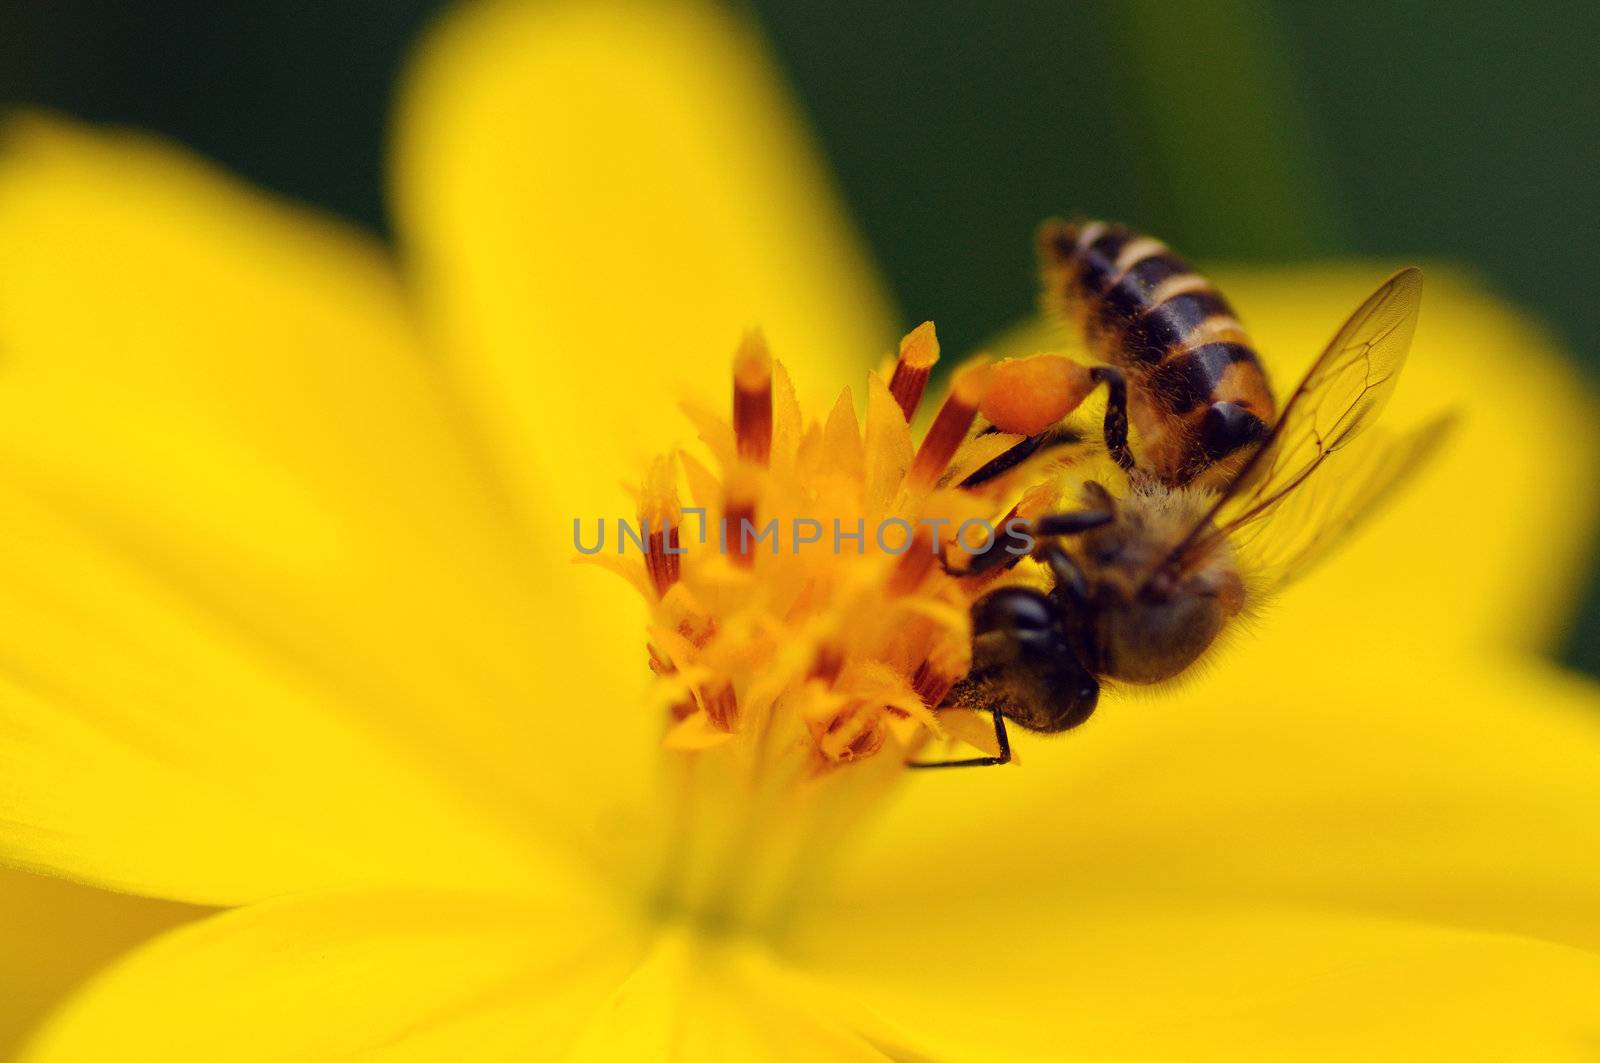 A bee pollinating a fresh yellow flower